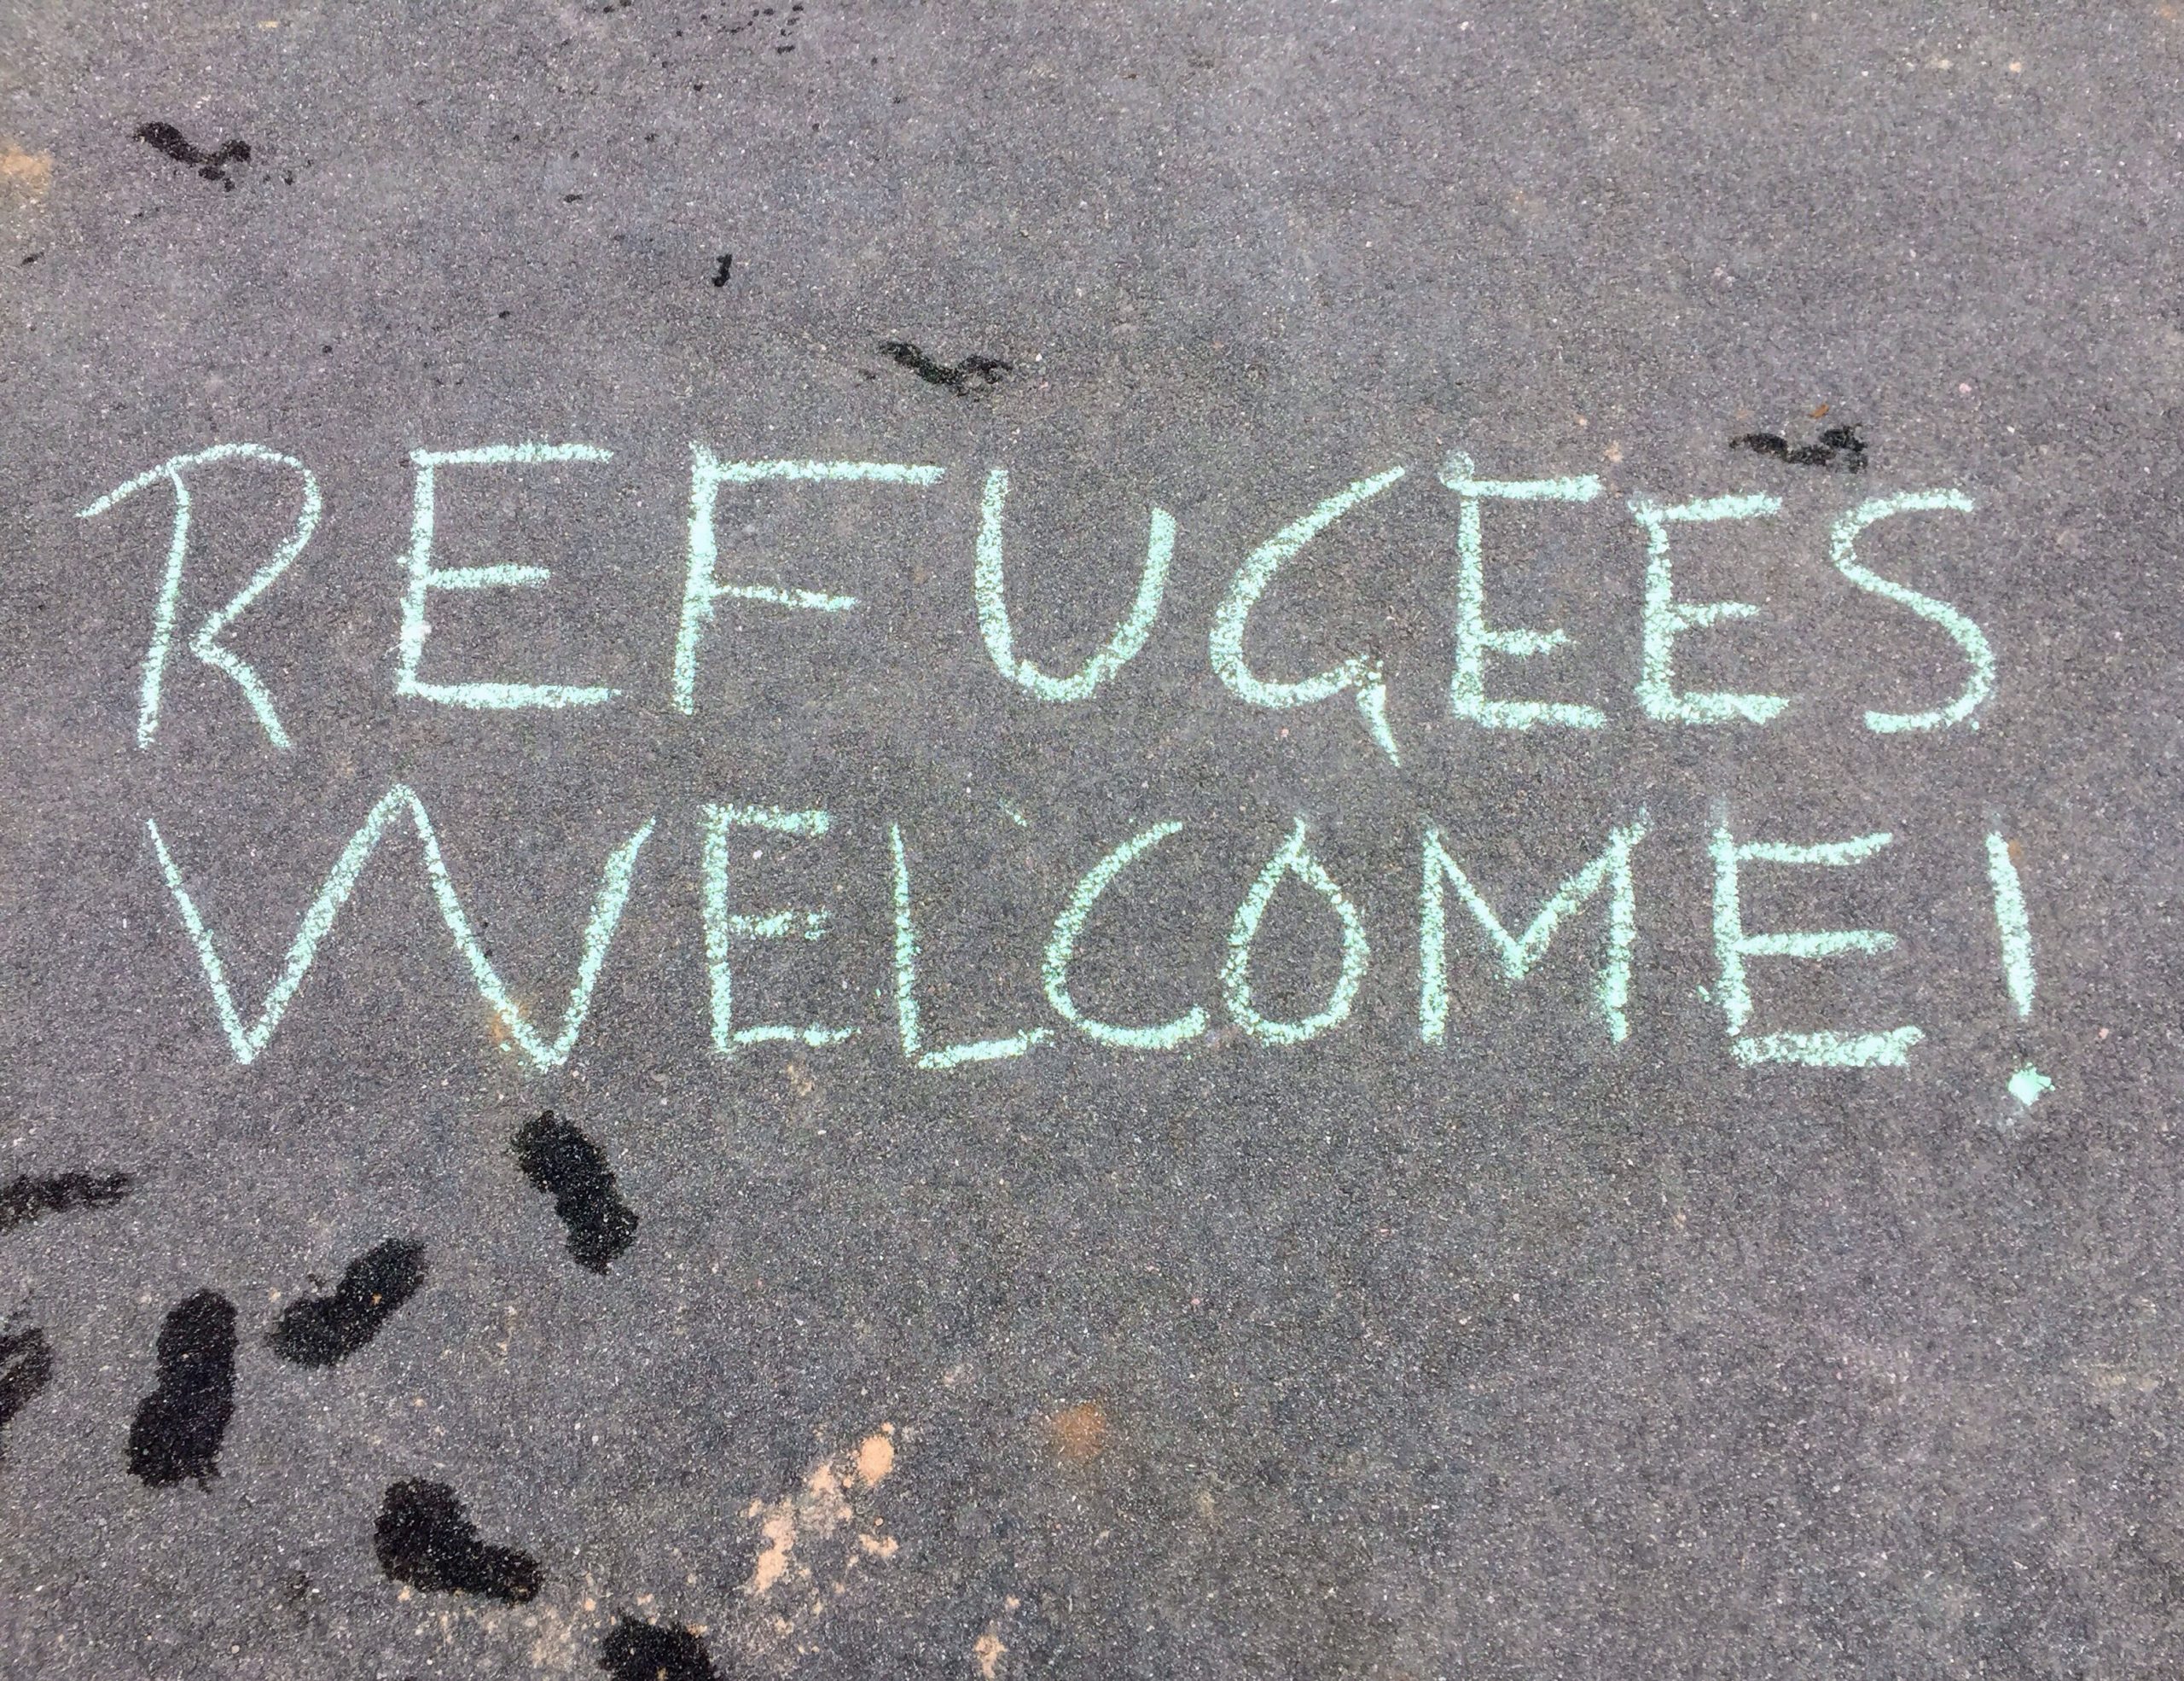 Refugees welcome written in chalk on the ground